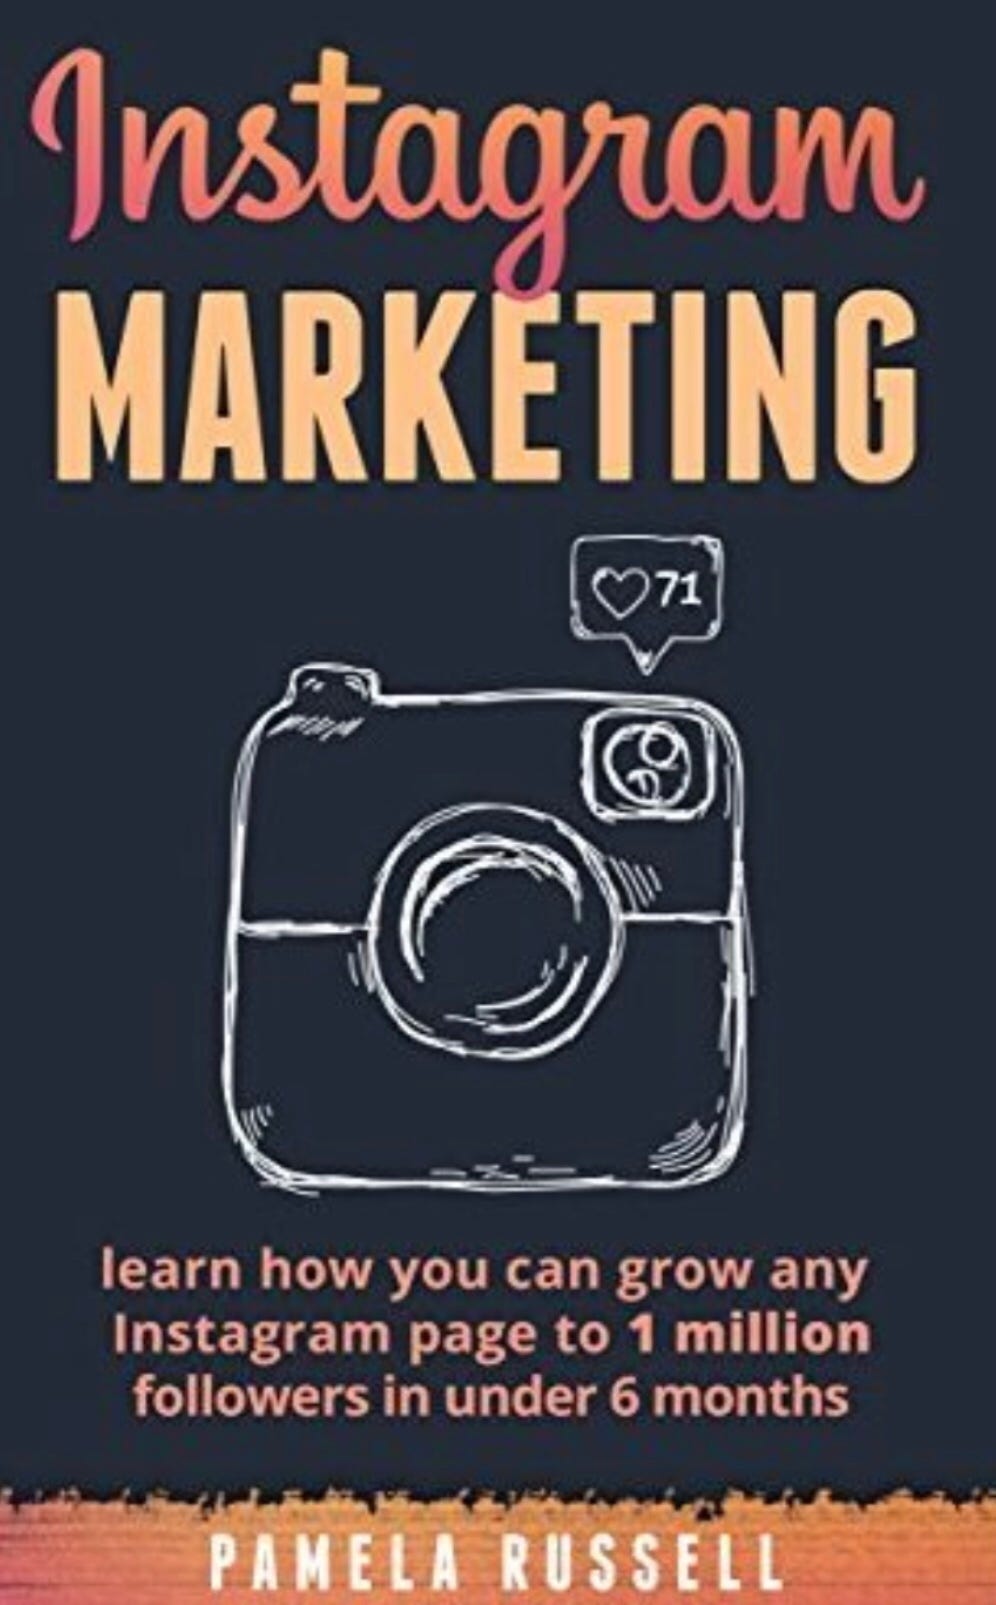 the main focus of her book is to help users get familiar with instagram and learn how to grow their new page to 1 million followers in under 6 months - instagram pages that can get you lots of followers